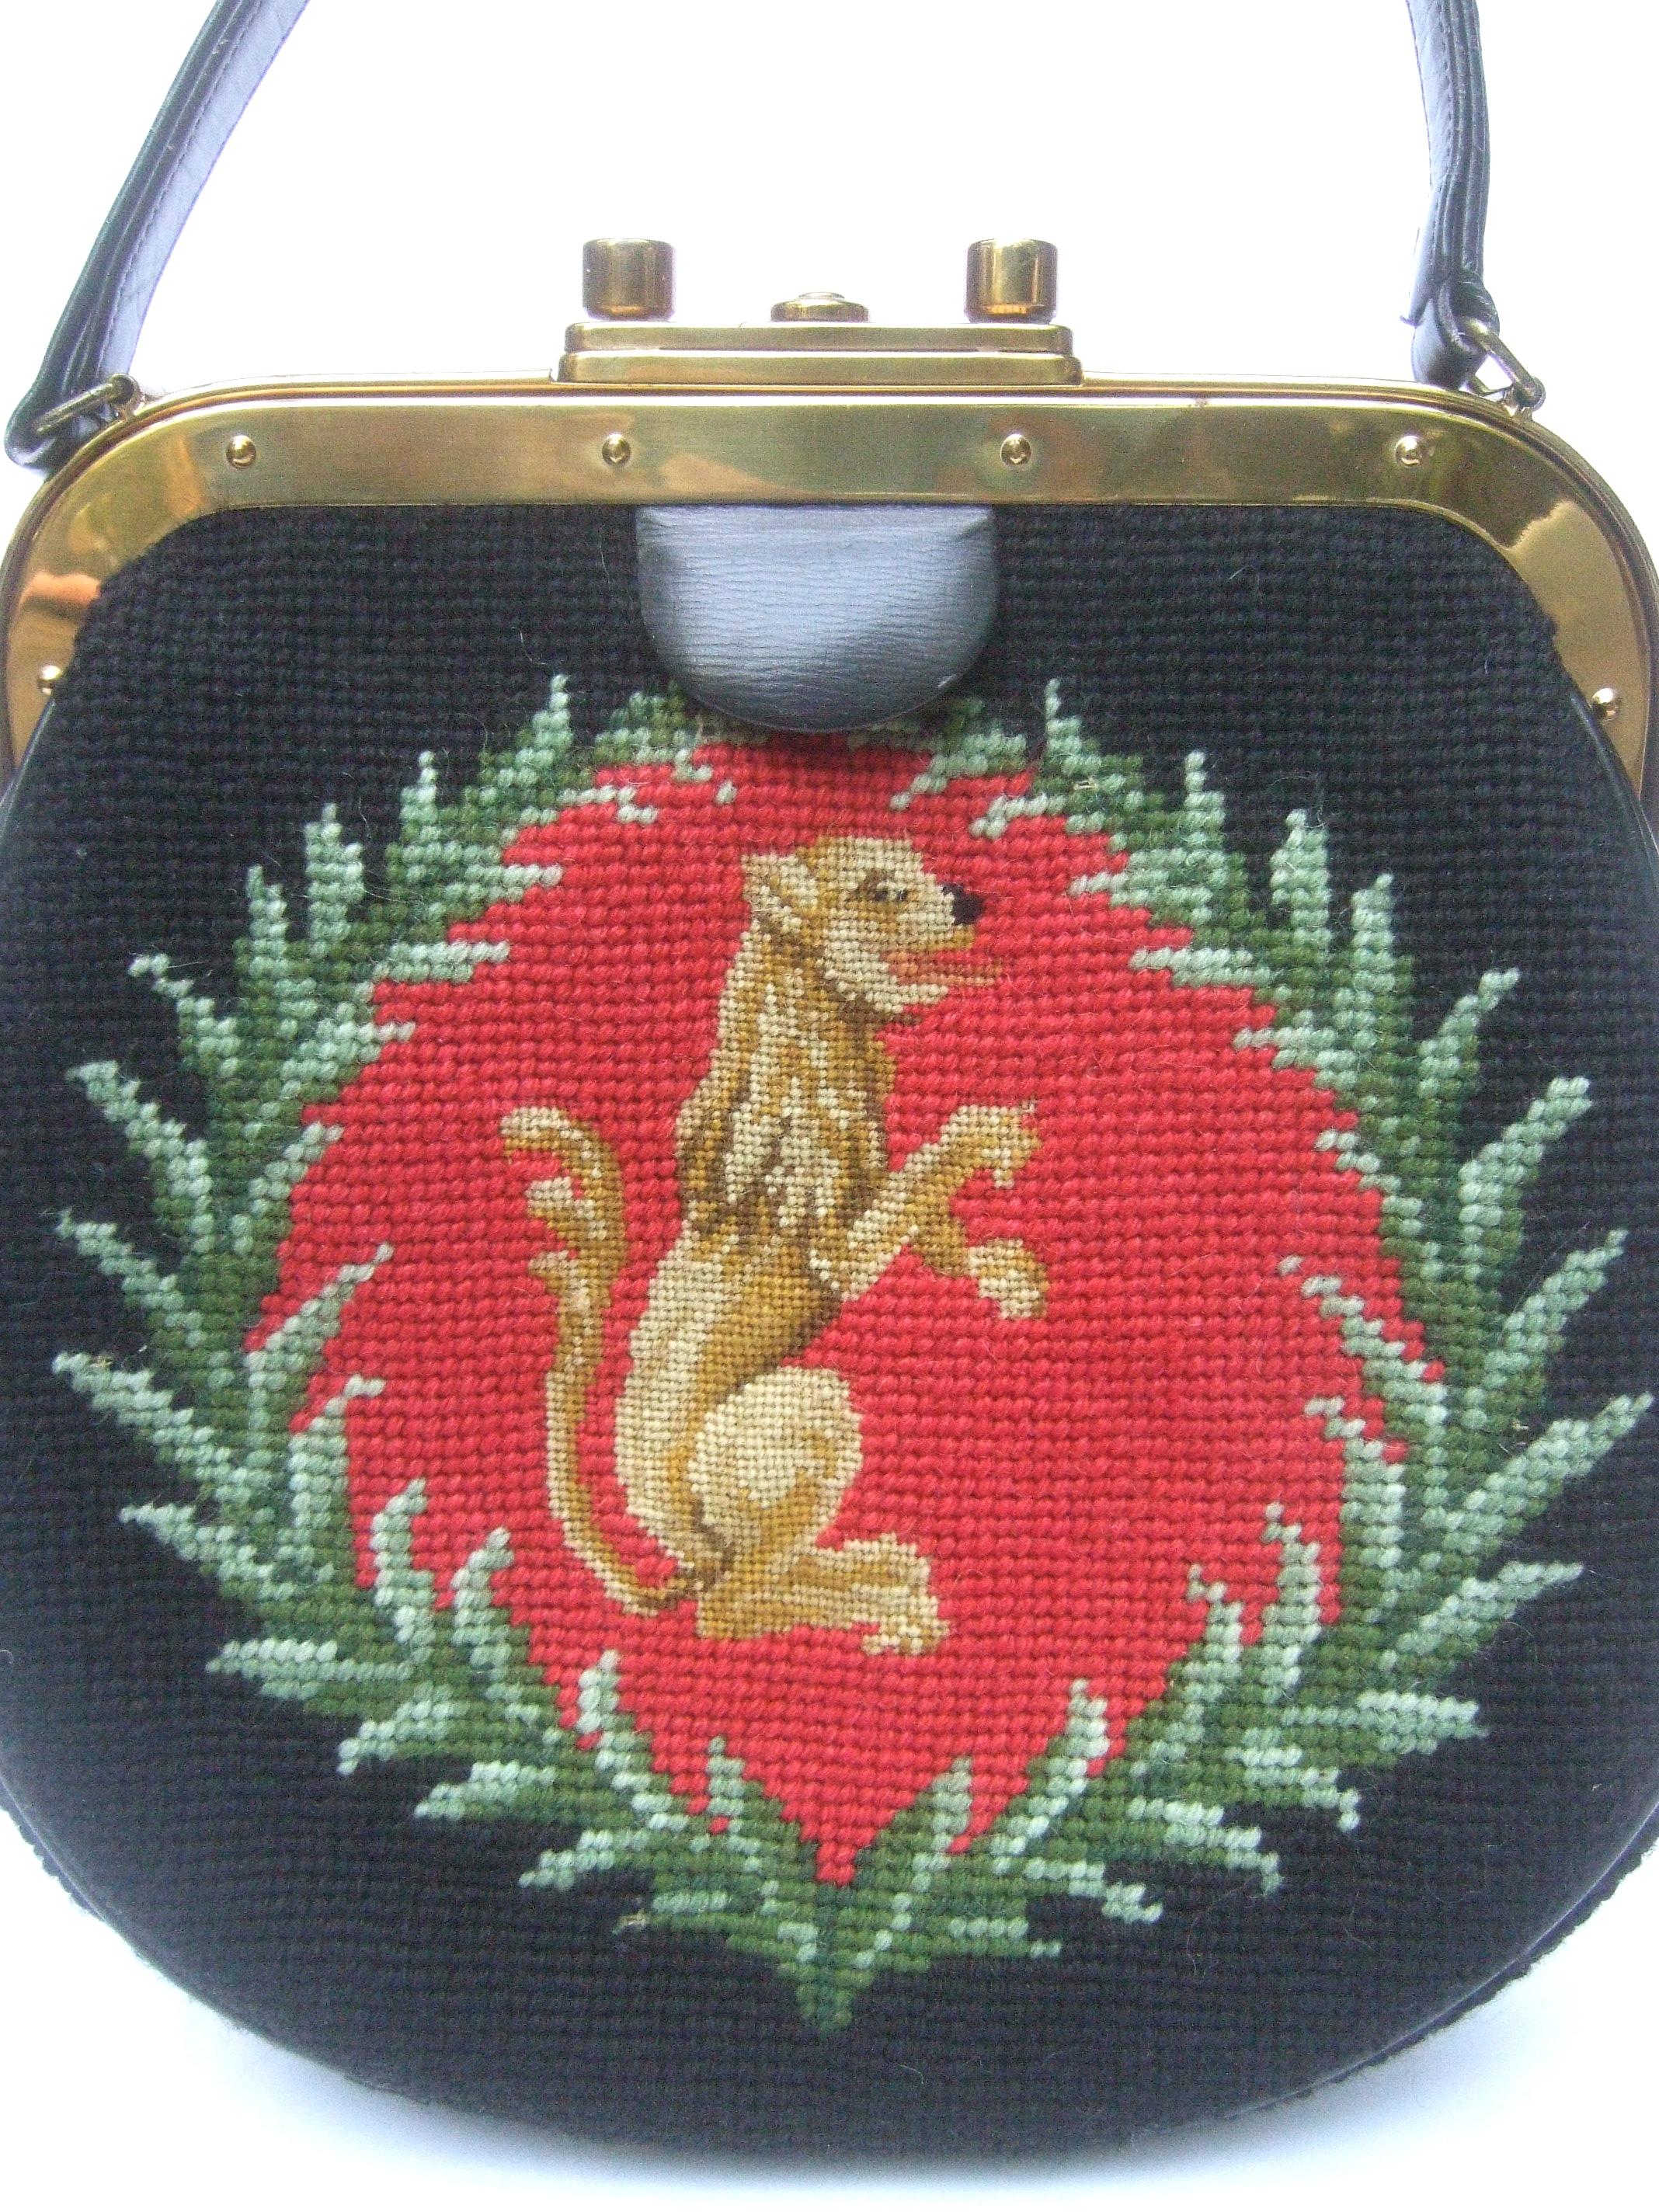 Elegant needlepoint artisan griffin & laurels vintage handbag c 1970
The chic retro needlepoint artisan handbag is decorated with an endearing griffin 
figure; surrounded with a wreath of laurels that is replicated on both exterior sides
Illuminated